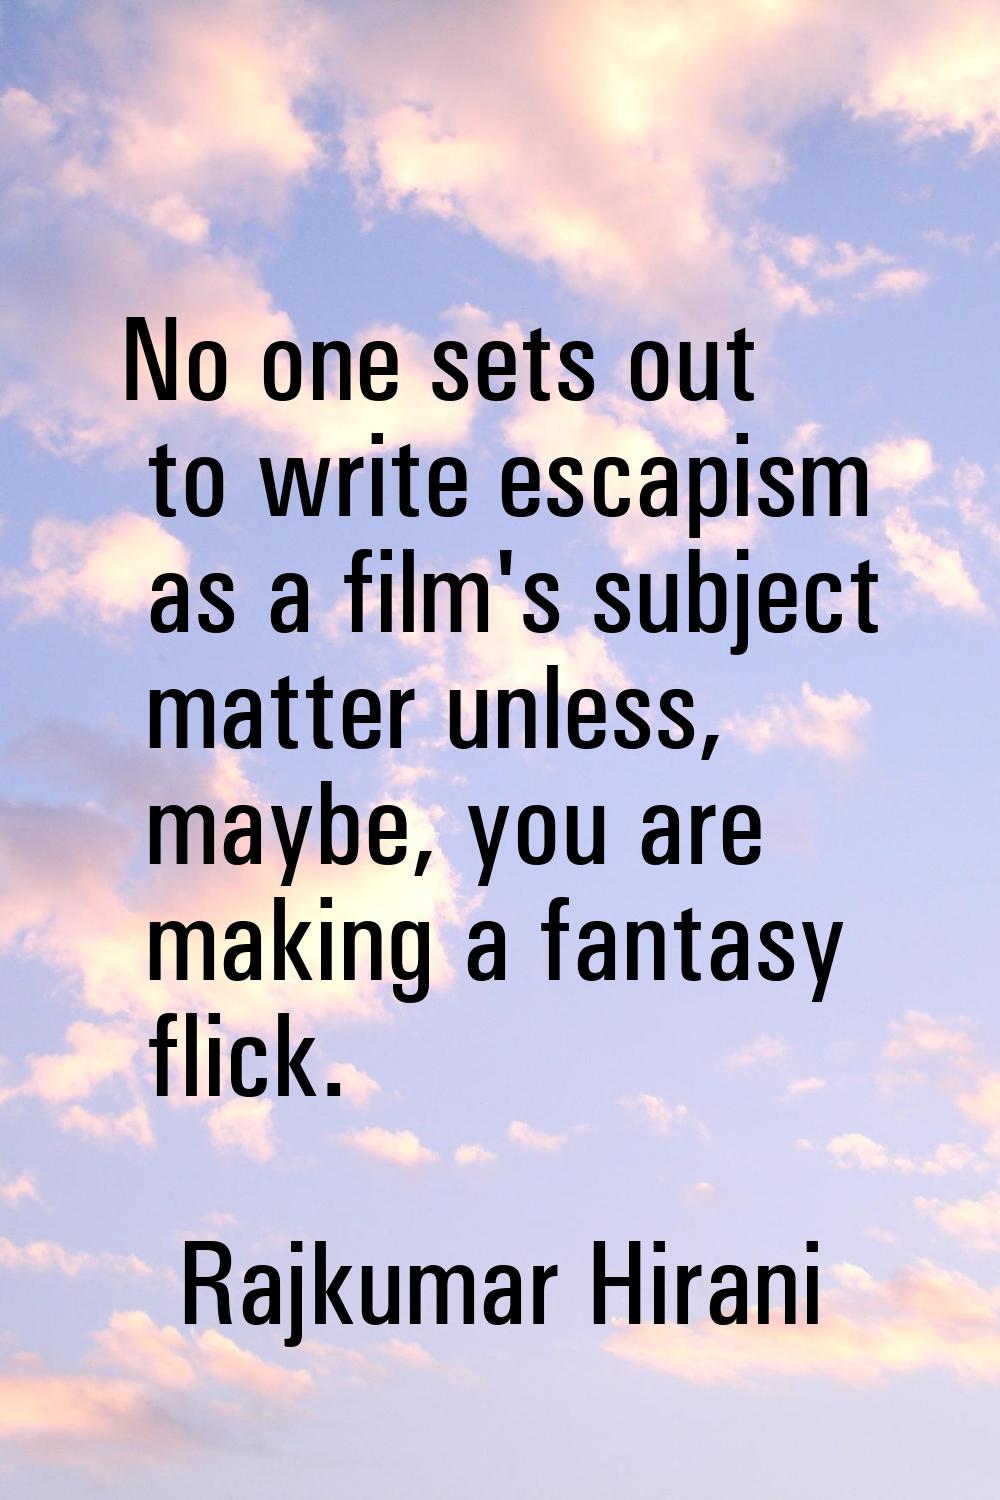 No one sets out to write escapism as a film's subject matter unless, maybe, you are making a fantas